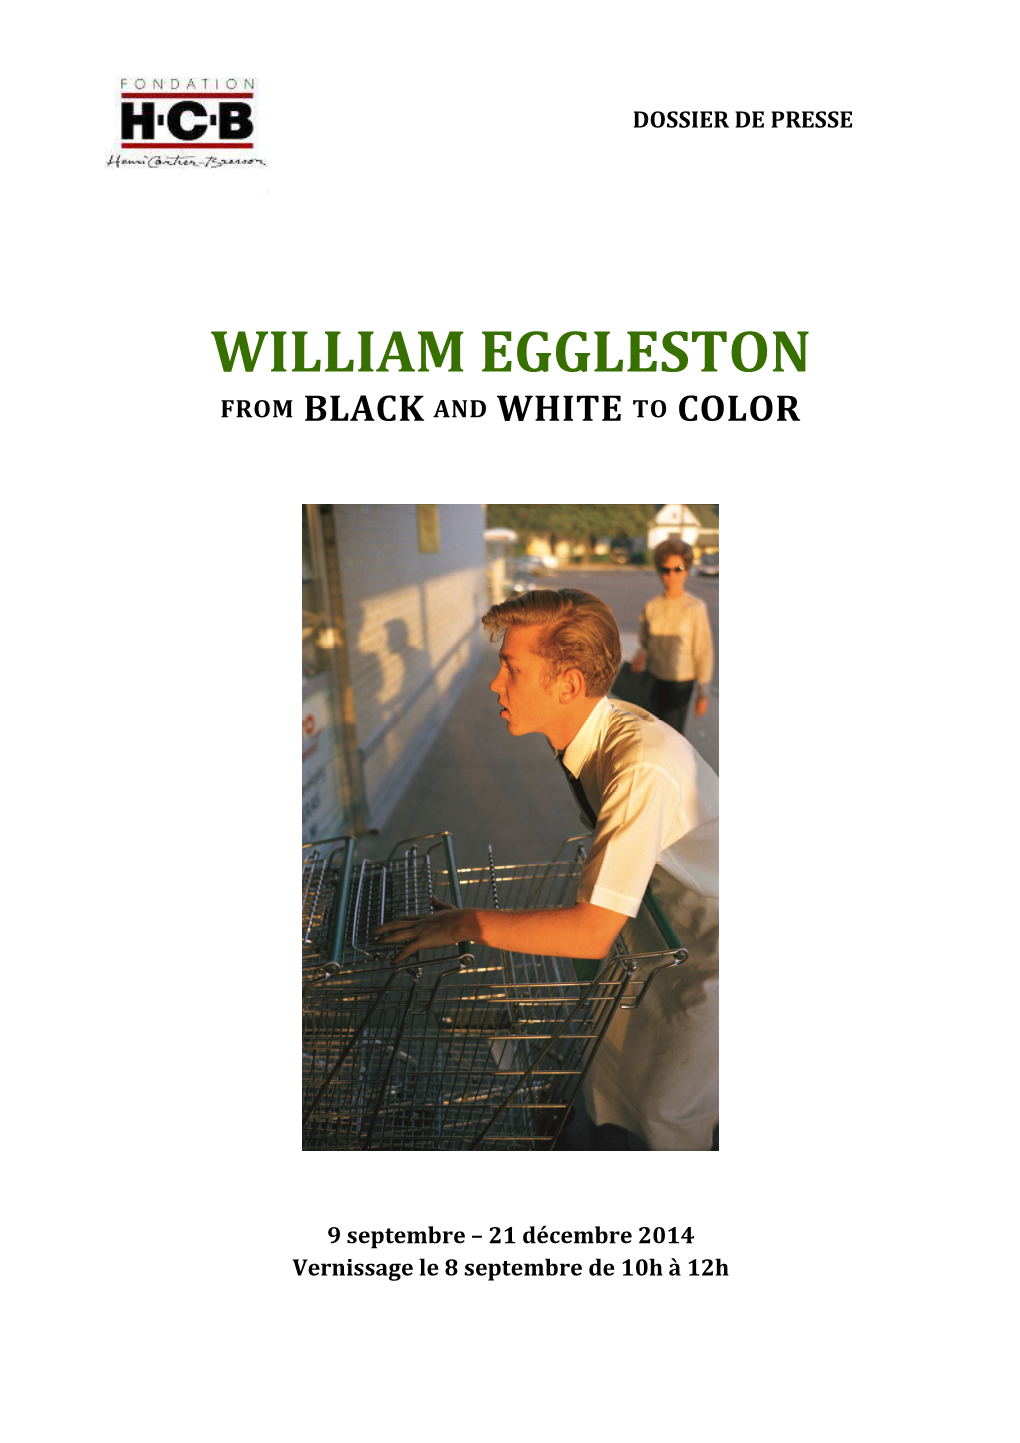 William Eggleston from Black and White to Color